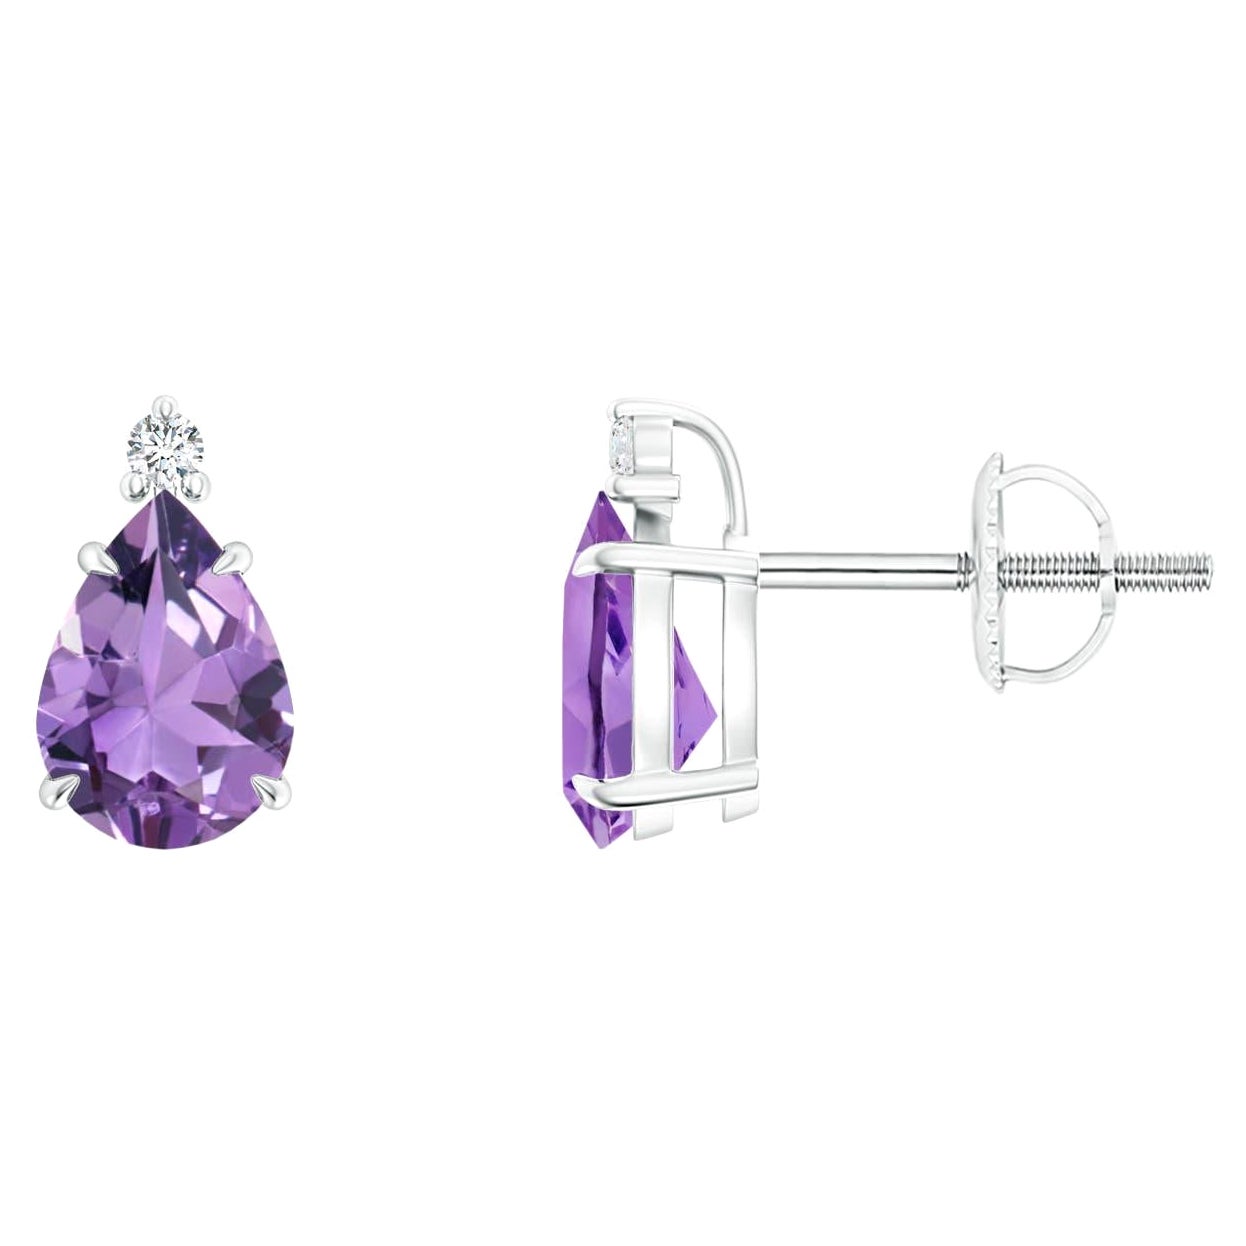 Natural Claw-Set Pear 1.2ct Amethyst Solitaire Earrings in Platinum